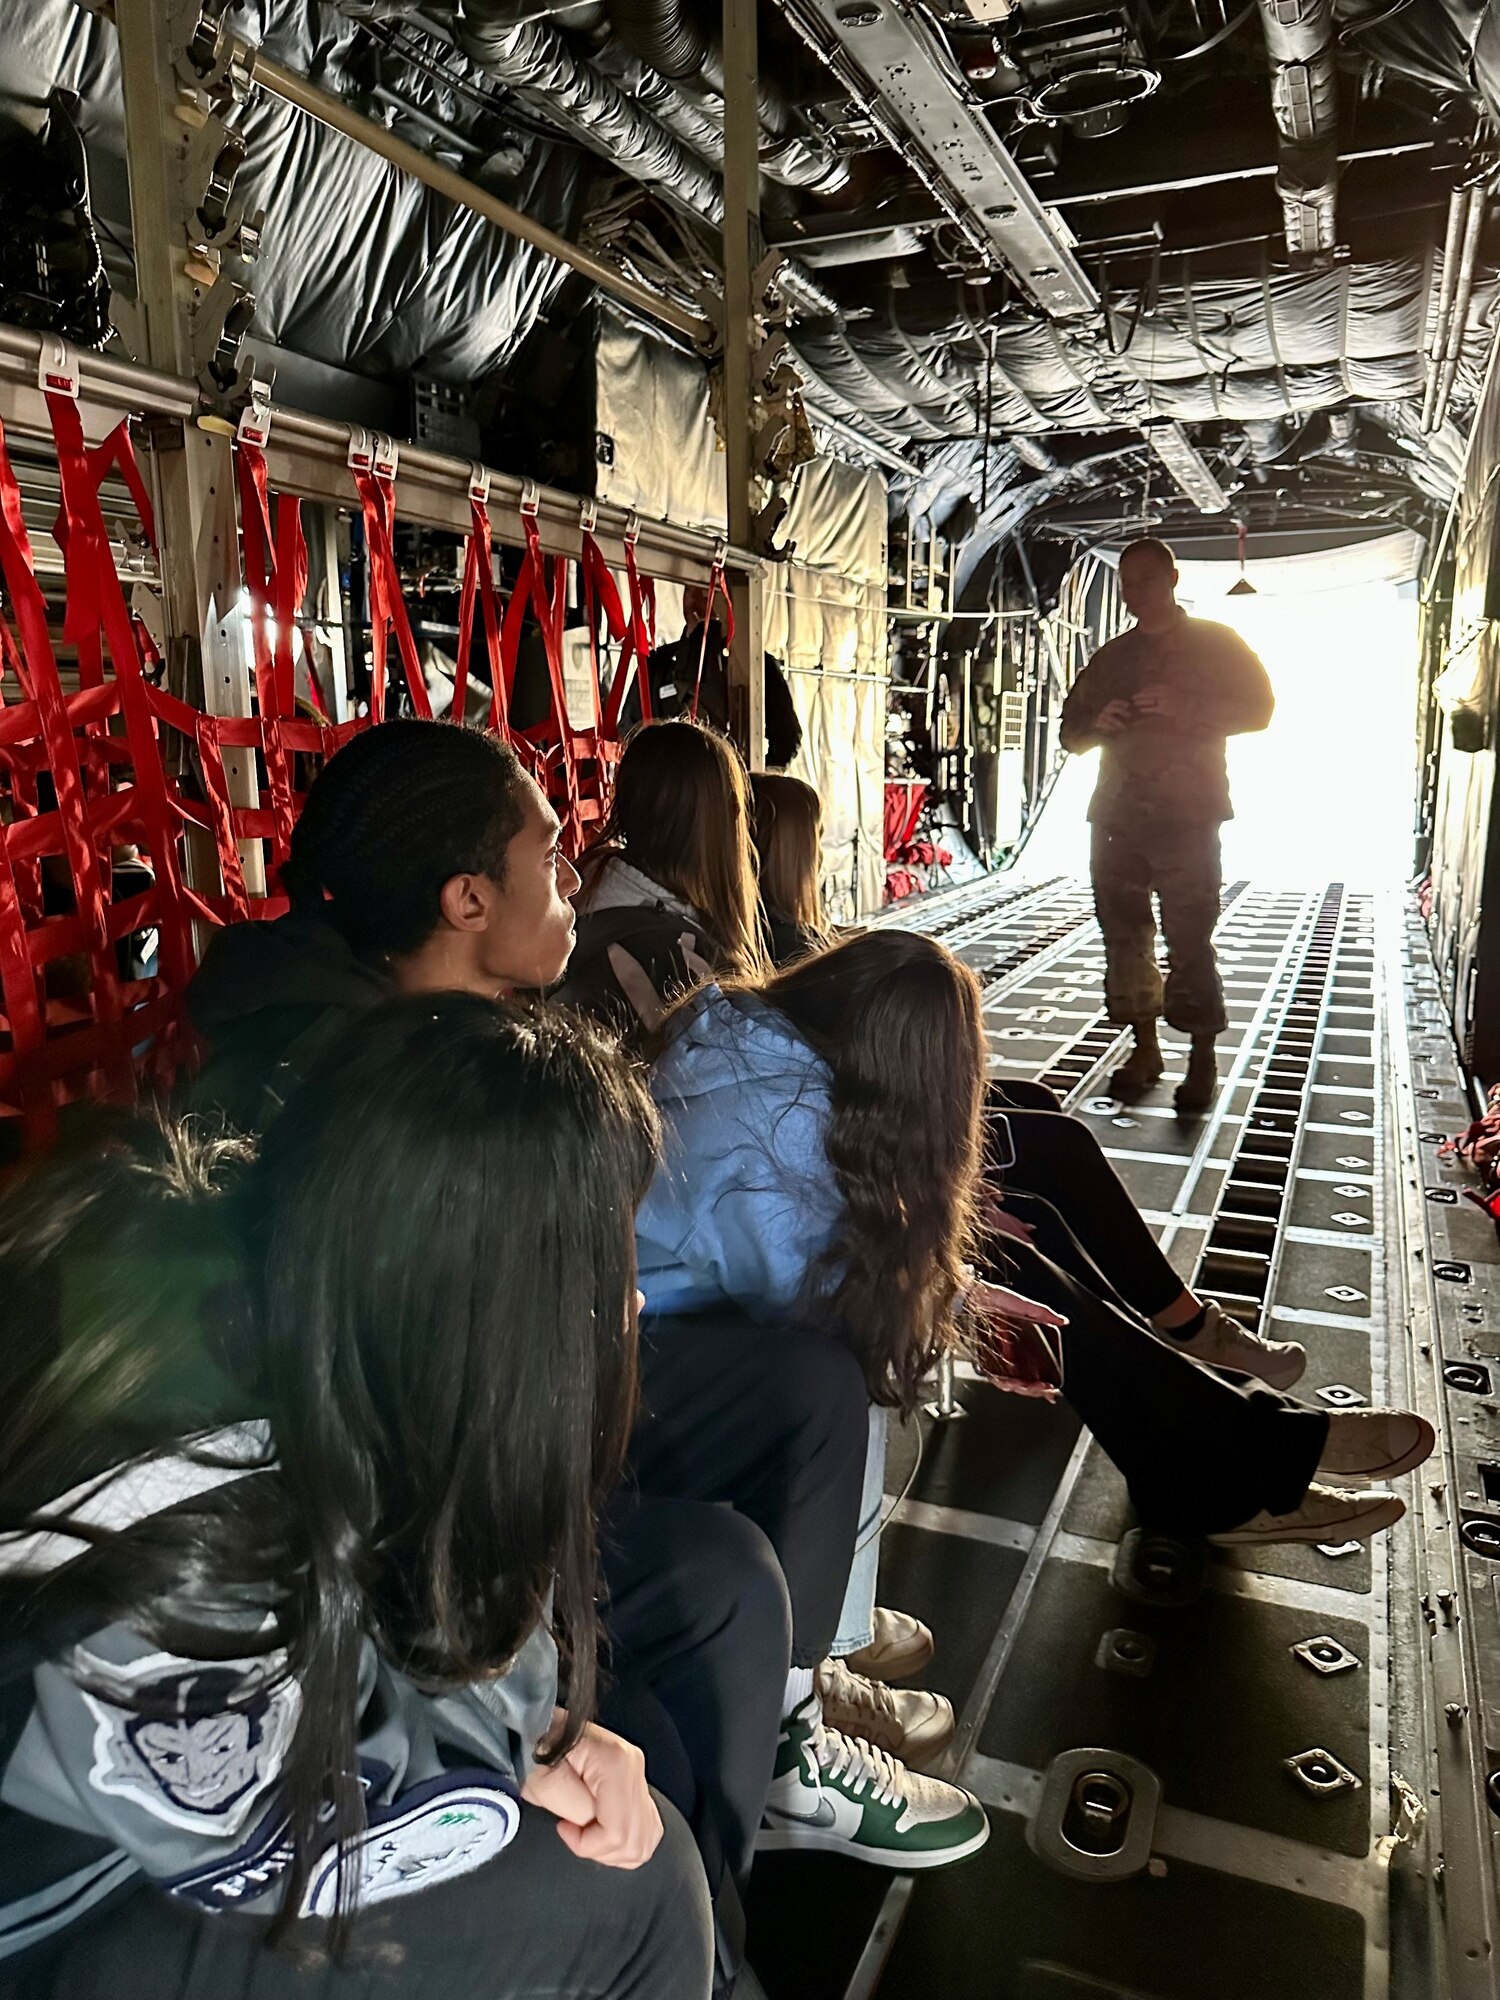 a group of people sit inside an aircraft as a military member speaks to them